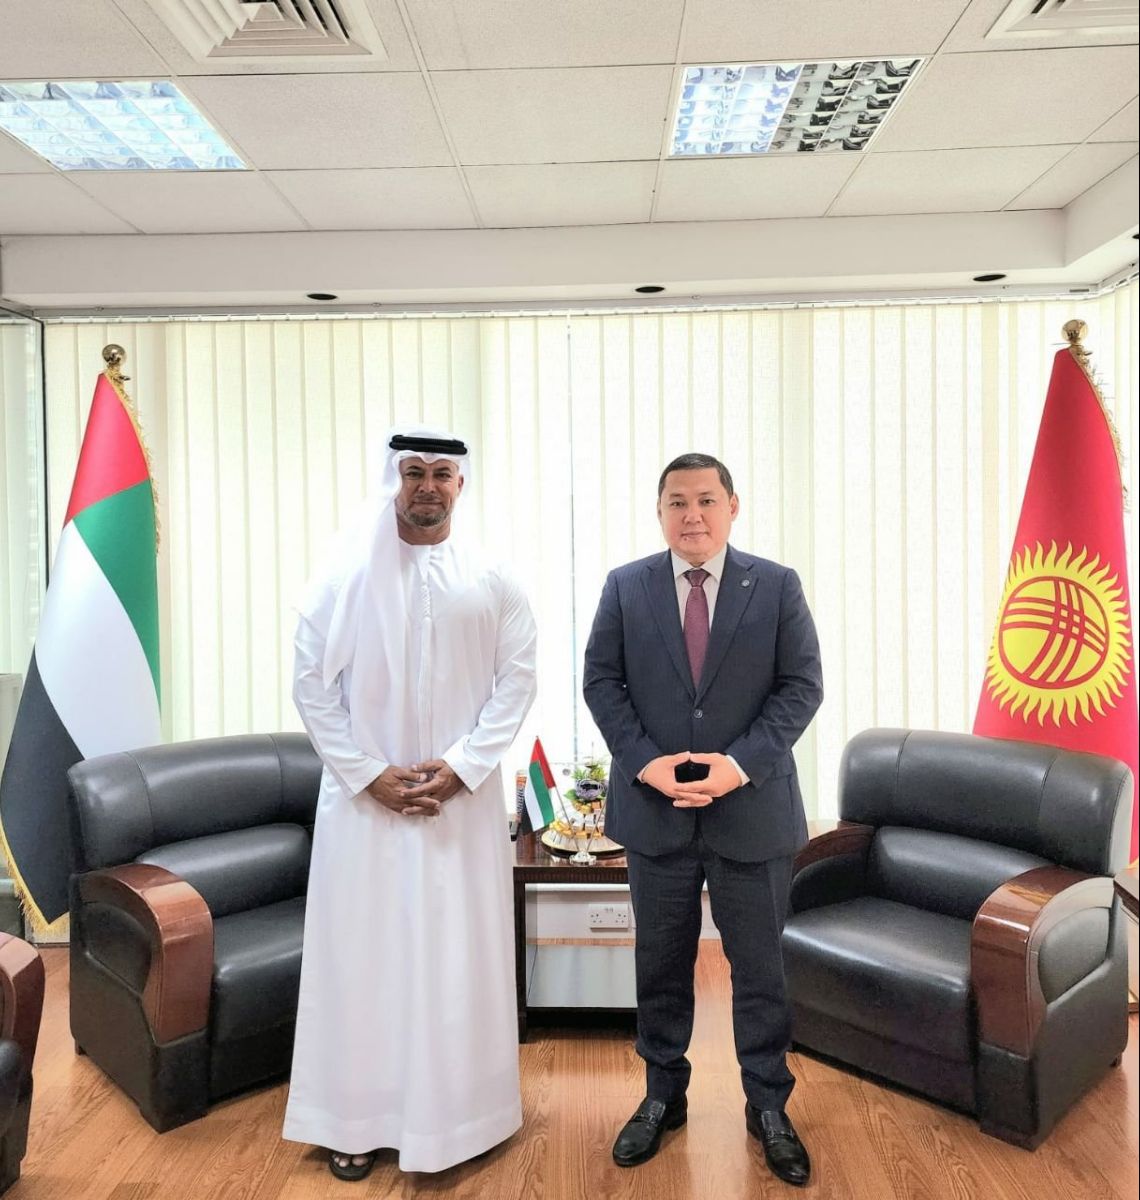 Consul General of the Kyrgyz Republic HETimur Abdizhalil met with  HE Mohamed Al-Ali, Managing Director & Head of Global Transactional Banking Operations of Investment and Corporate Banking Group of  «First Abu Dhabi Bank» in Dubai and the Northern Emirates, Vice President of  «Blue Ocean Corporation Group». 
During the fruitful meeting, the prospects for the development of bilateral relations and ways to strengthen it in the interests of the two brotherly countries were discussed. 